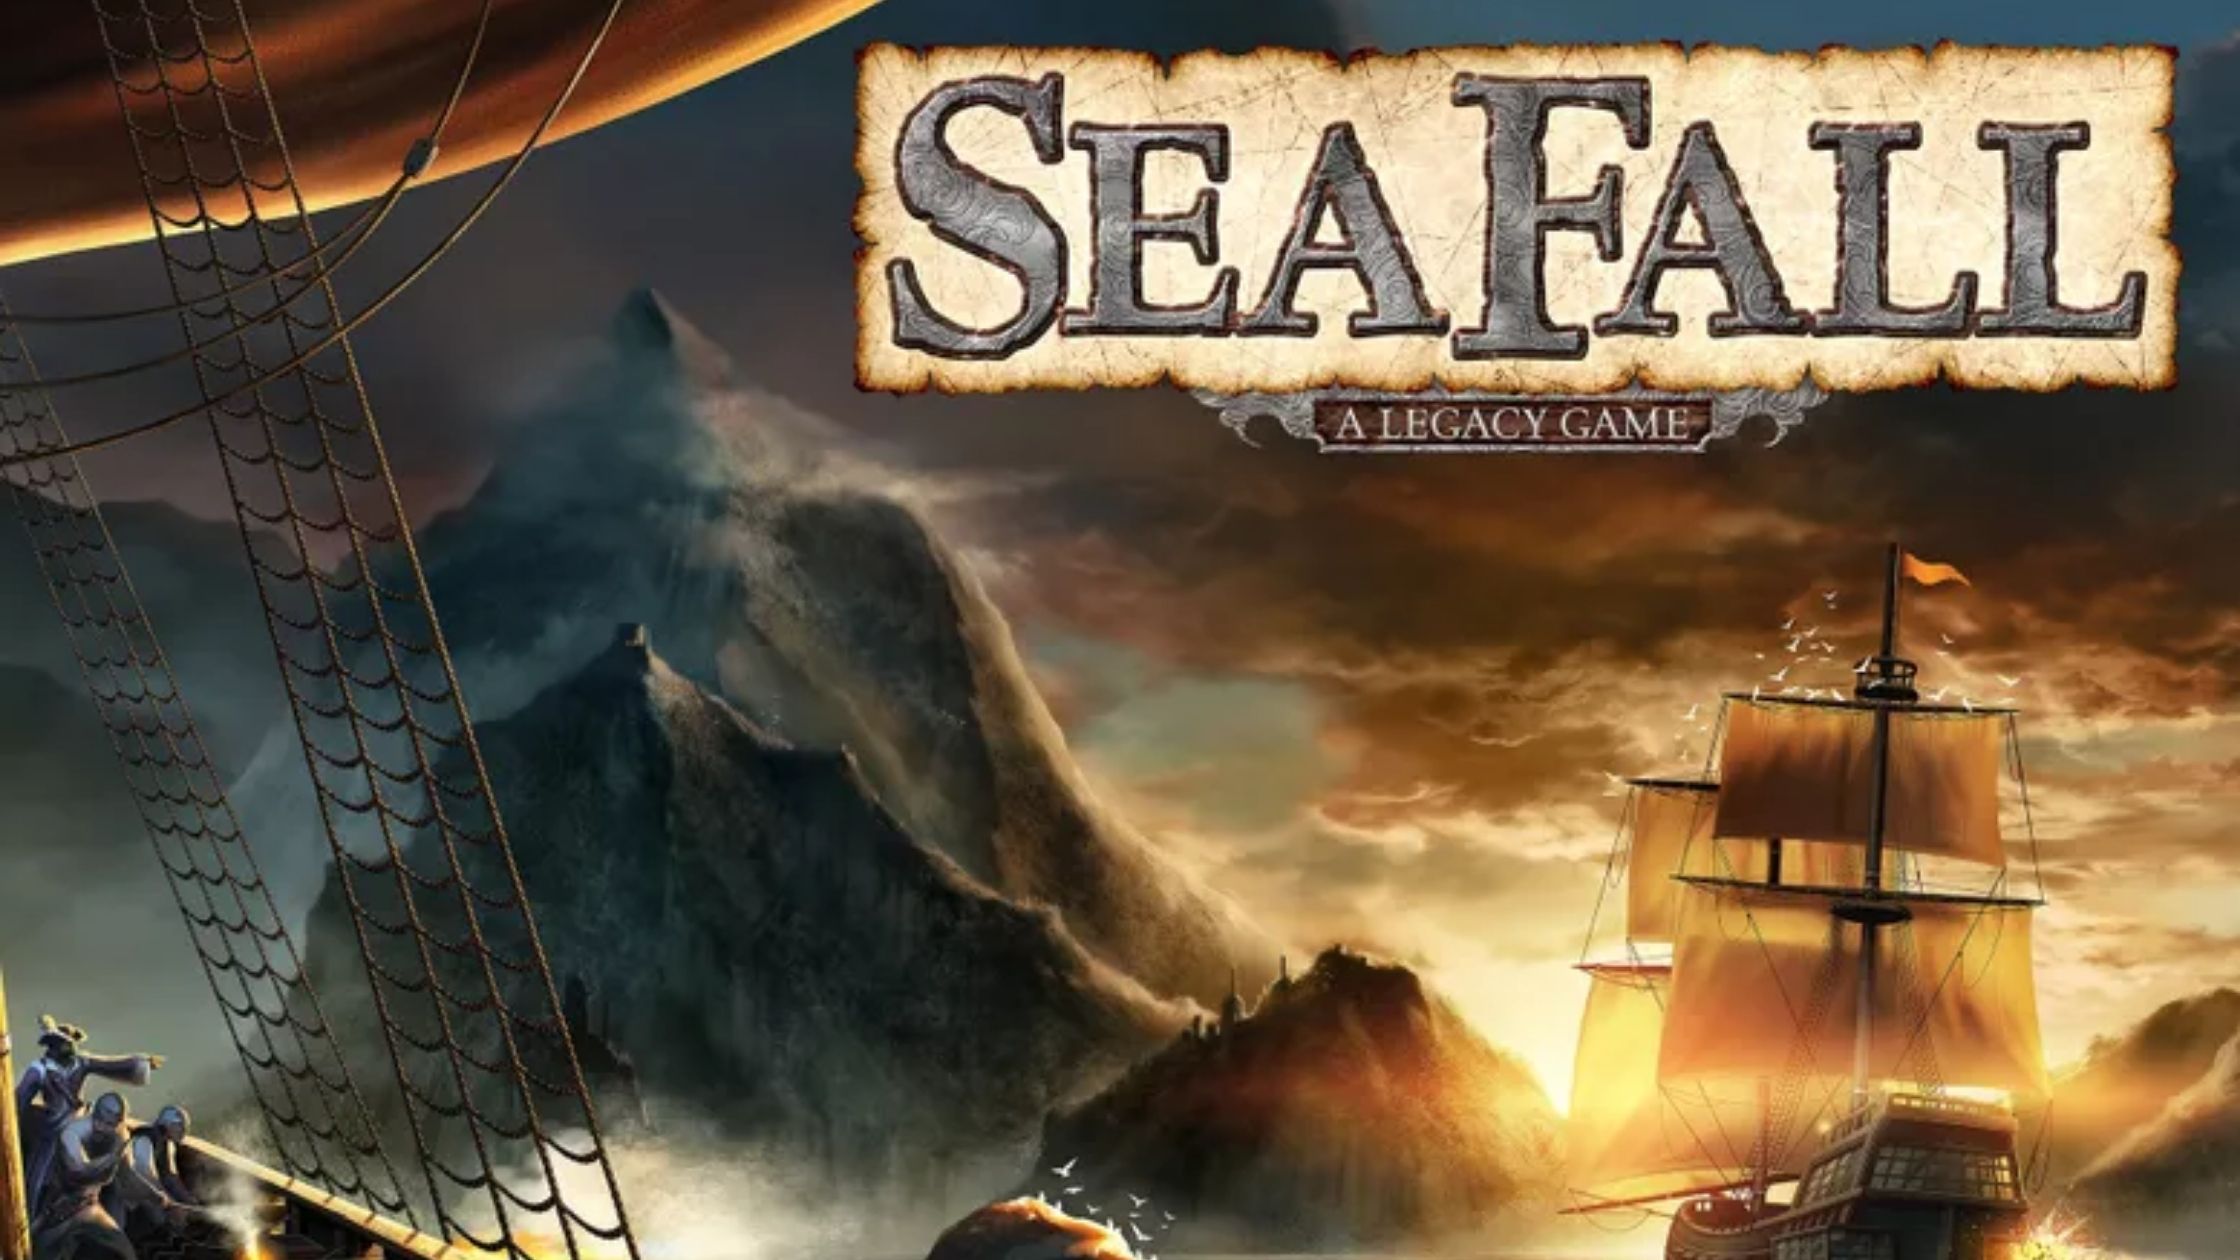 Seafall is an entertaining legacy board game